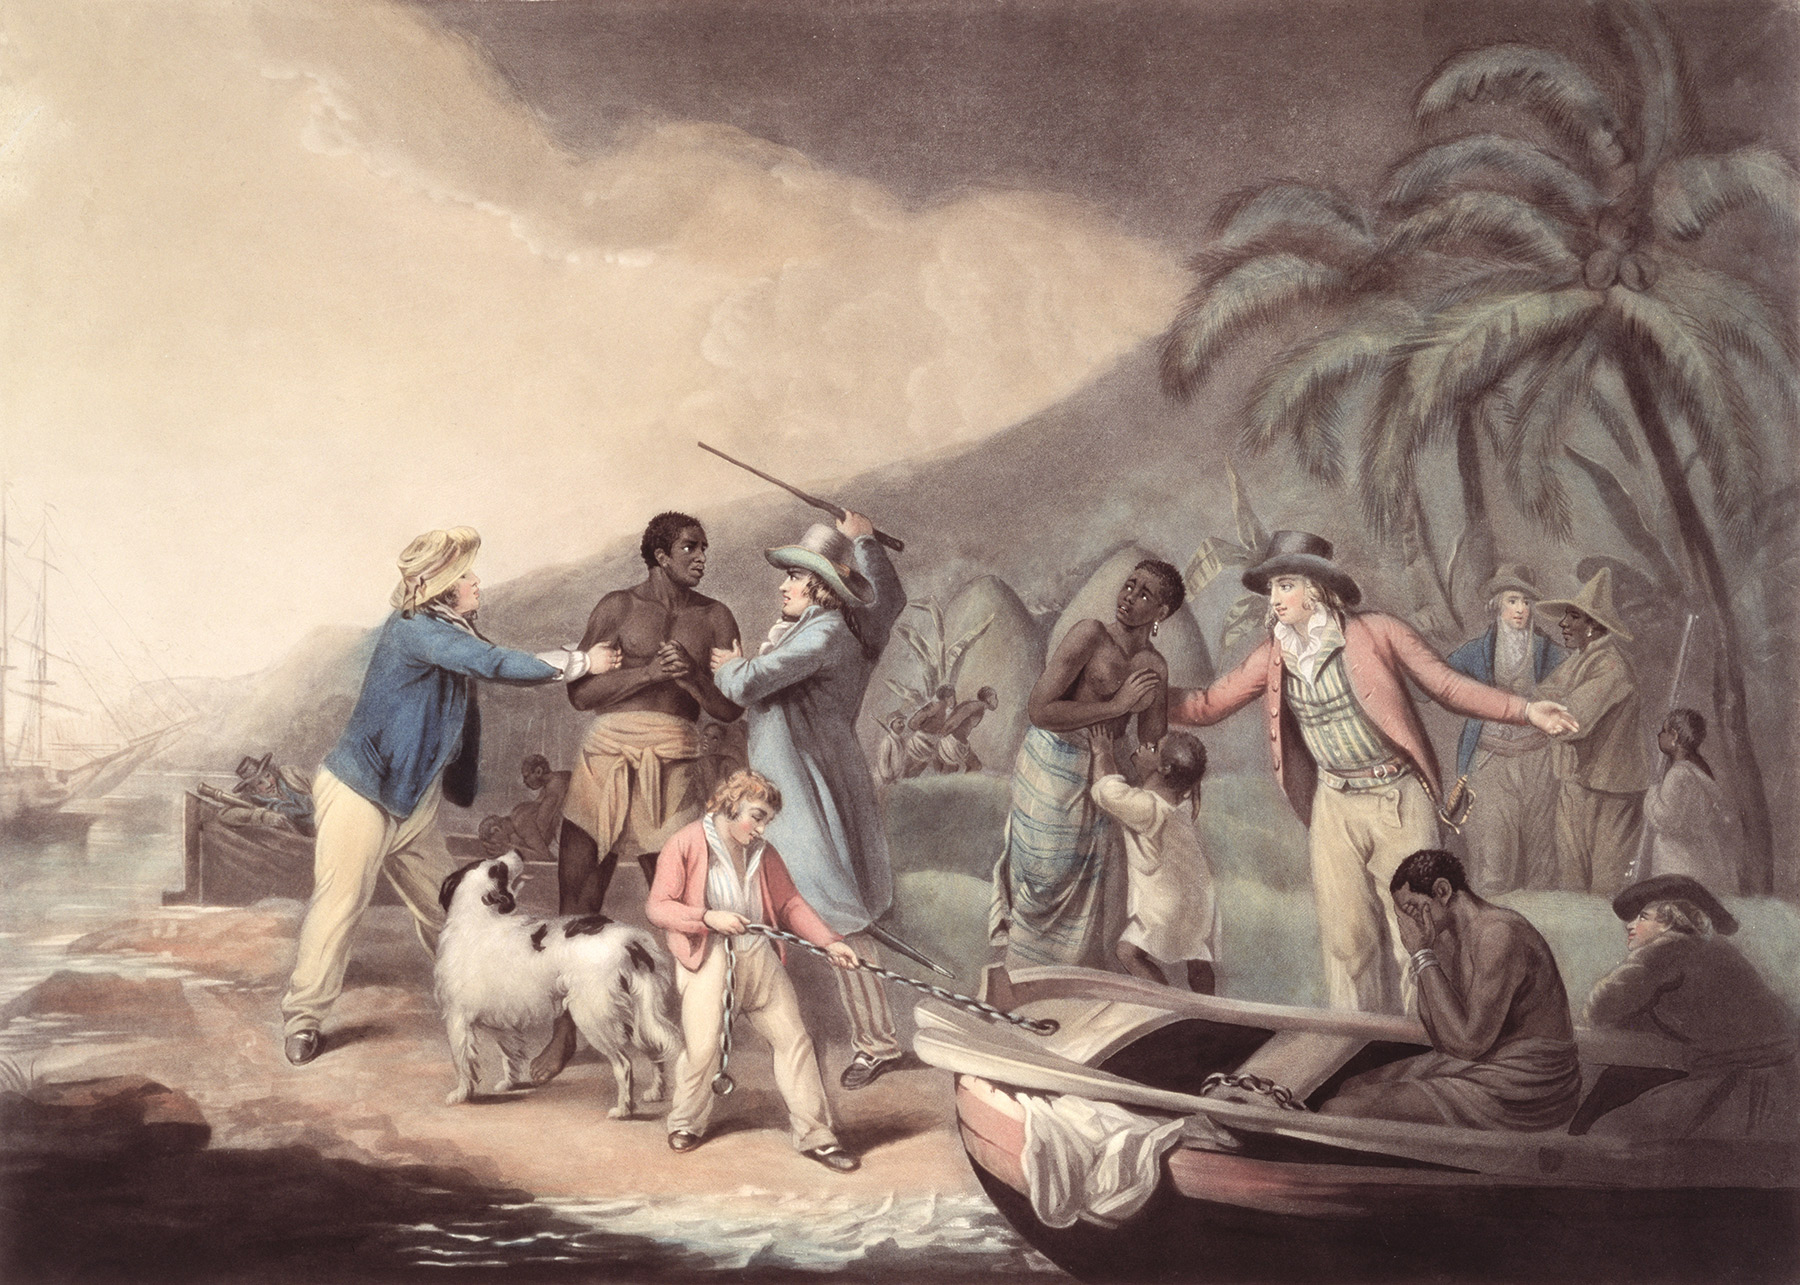 The Slave Trade, an engraving by J.R. Smith, late 18th century.